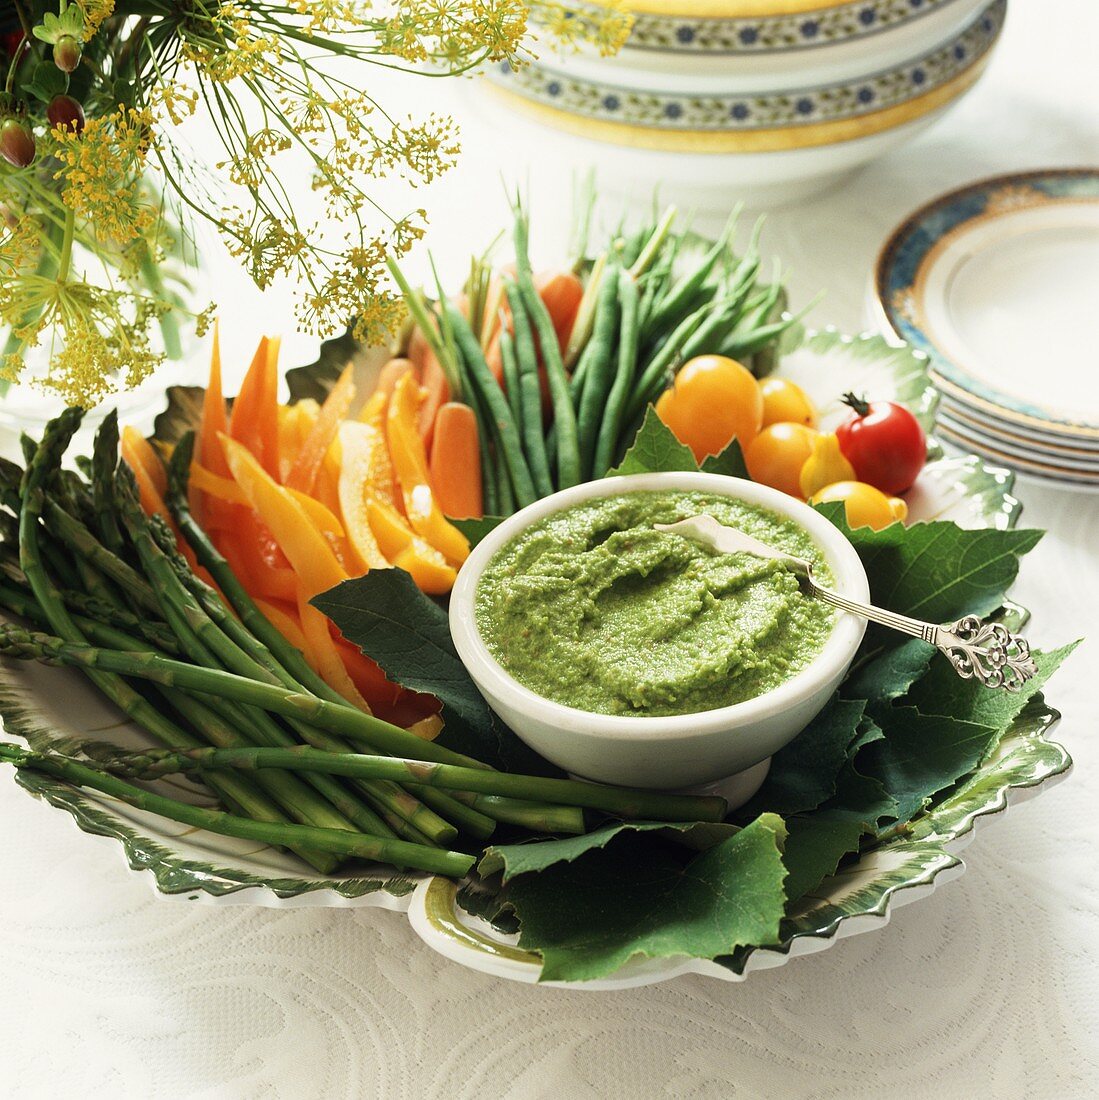 Pesto with Vegetables for Dipping